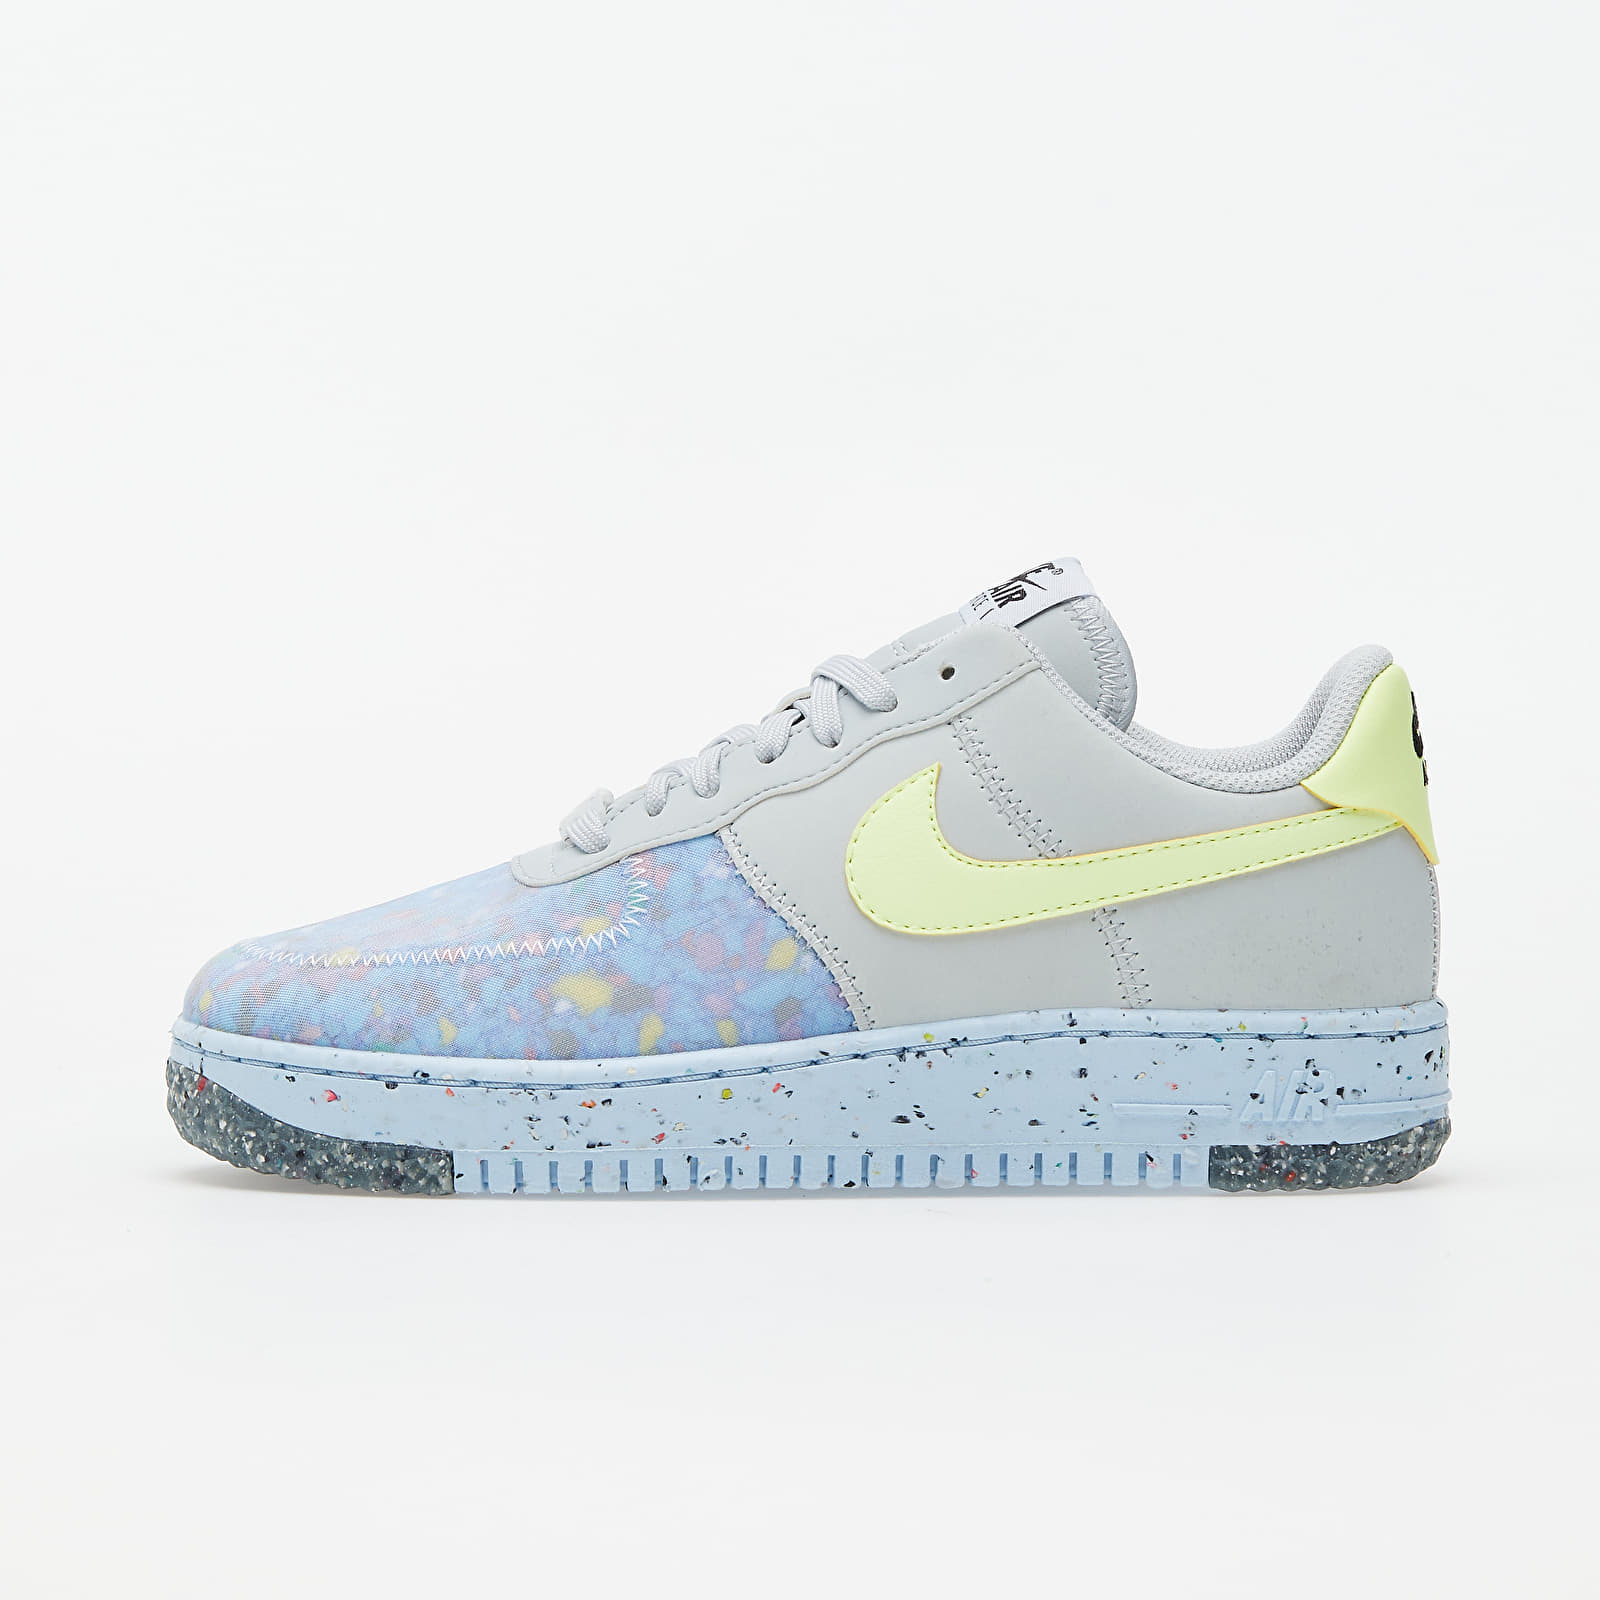 Nike W Air Force 1 Crater Pure Platinum/ Barely Volt-Summit White CT1986-001